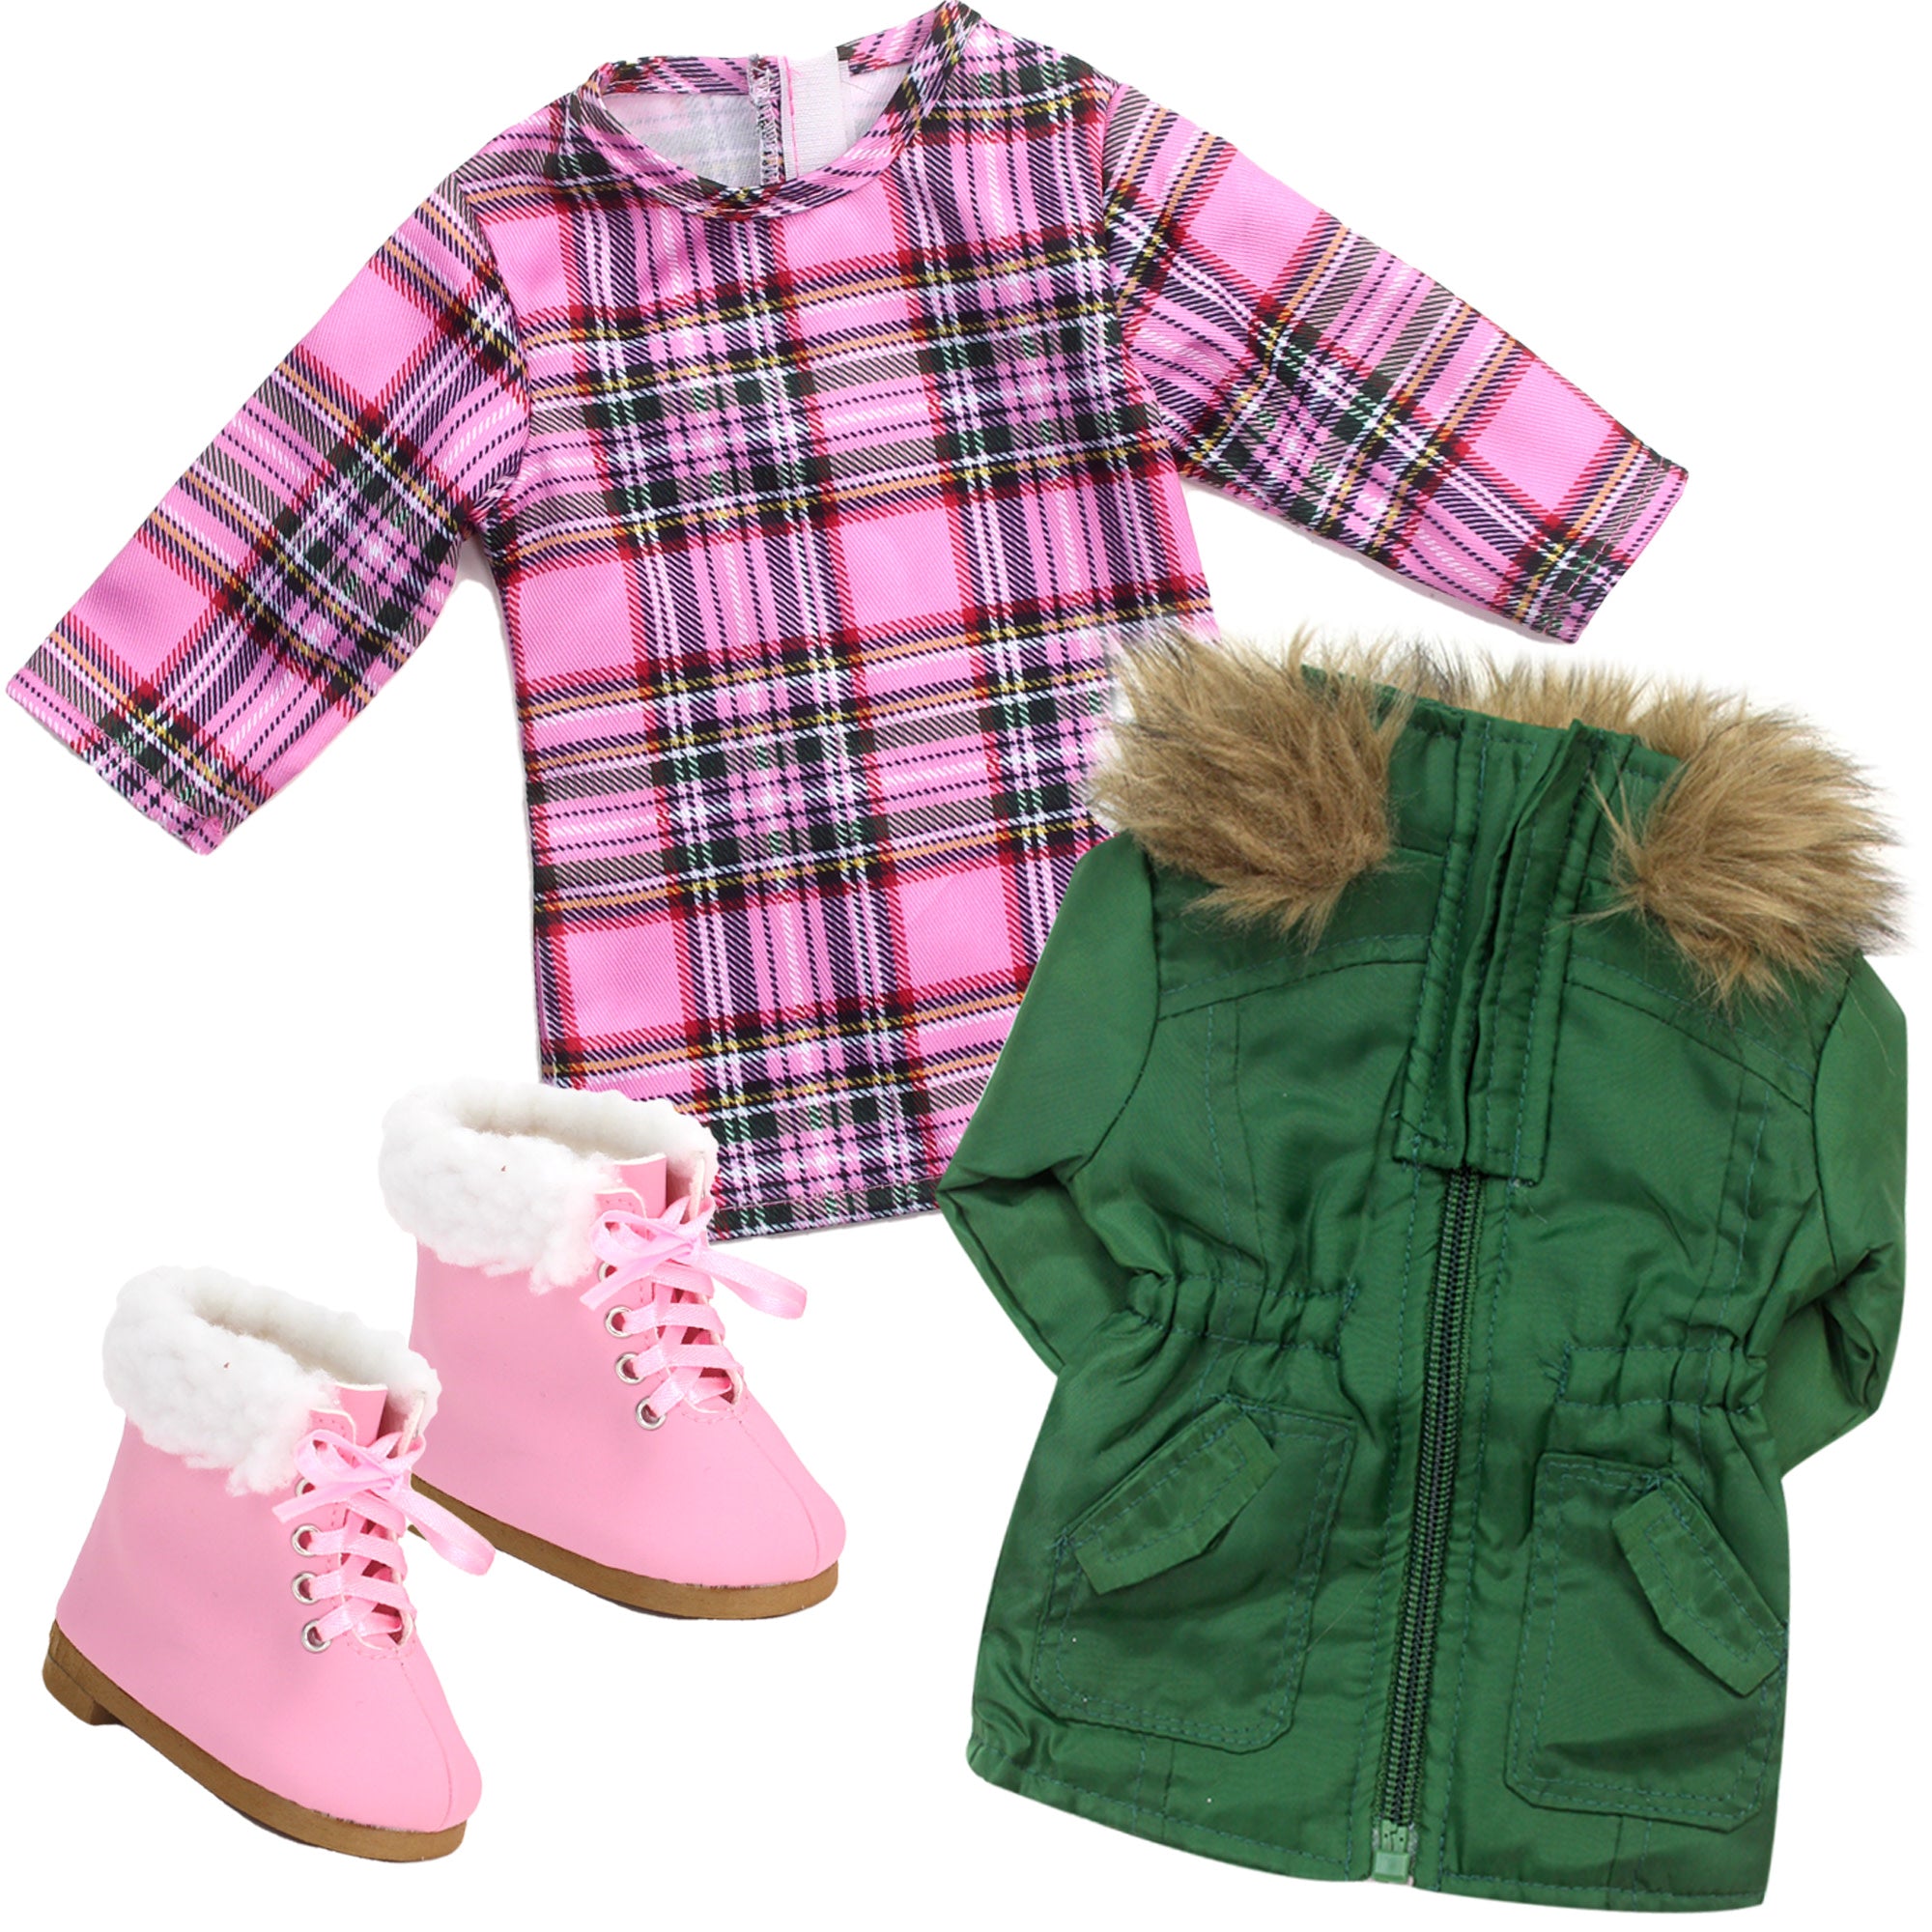 Sophia’s Complete Fall Outfit with Plaid Long-Sleeved Dress, Fur-Trimmed Parka, & Lace-Up Booties for 18” Dolls, Pink/Green